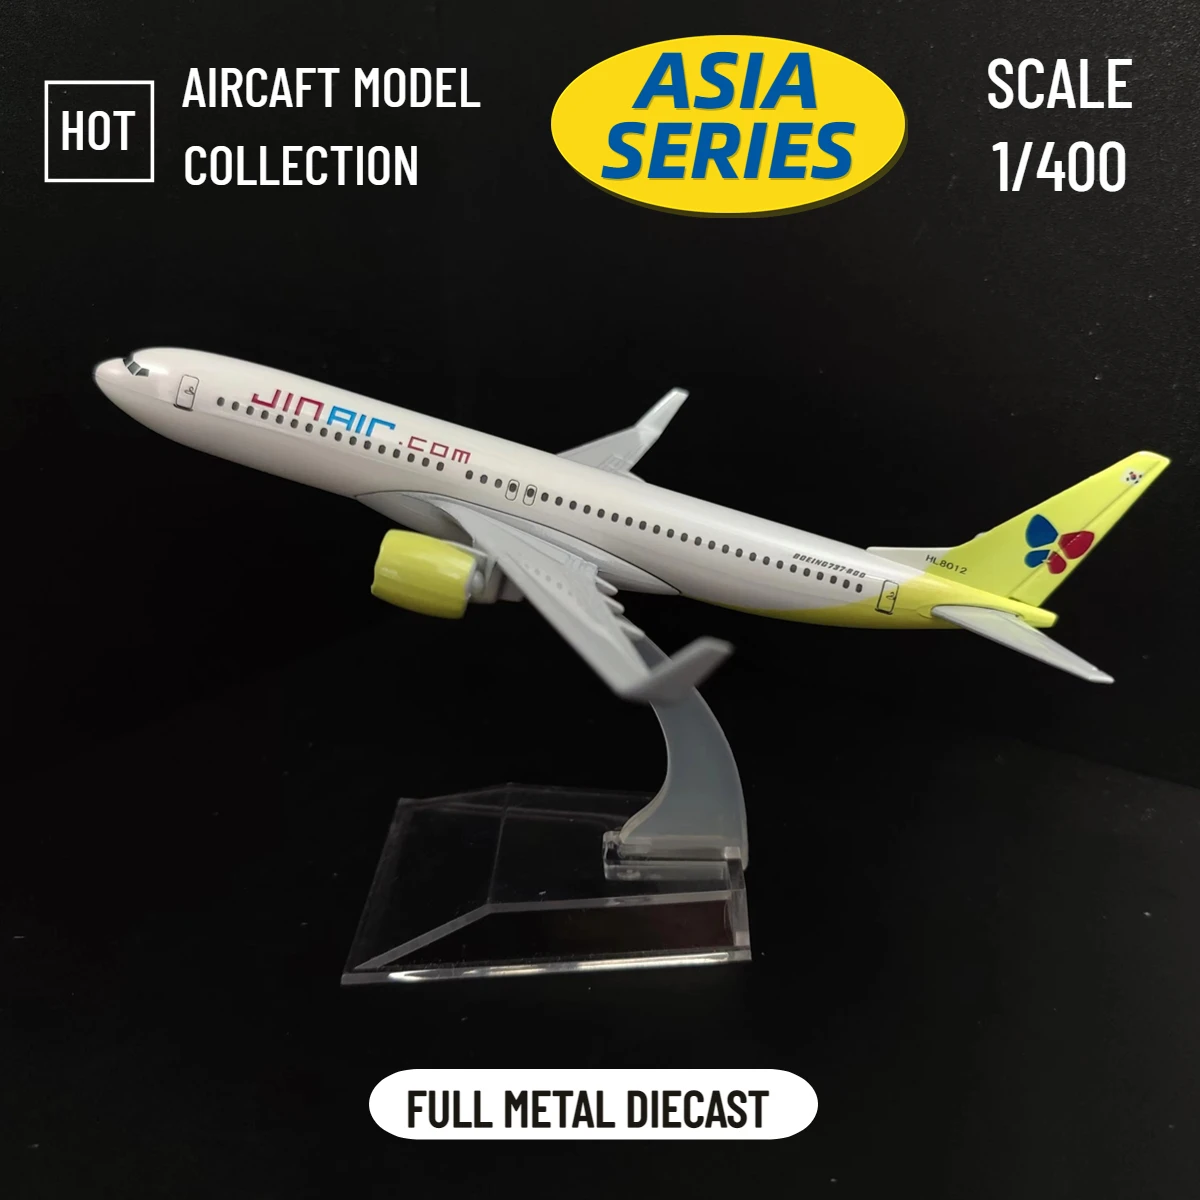 

Scale 1:400 Metal Aircraft Replica 15cm Korea Jin Air Asia Airlines Boeing Airplane Diecast Model Aviation Miniature for Boys